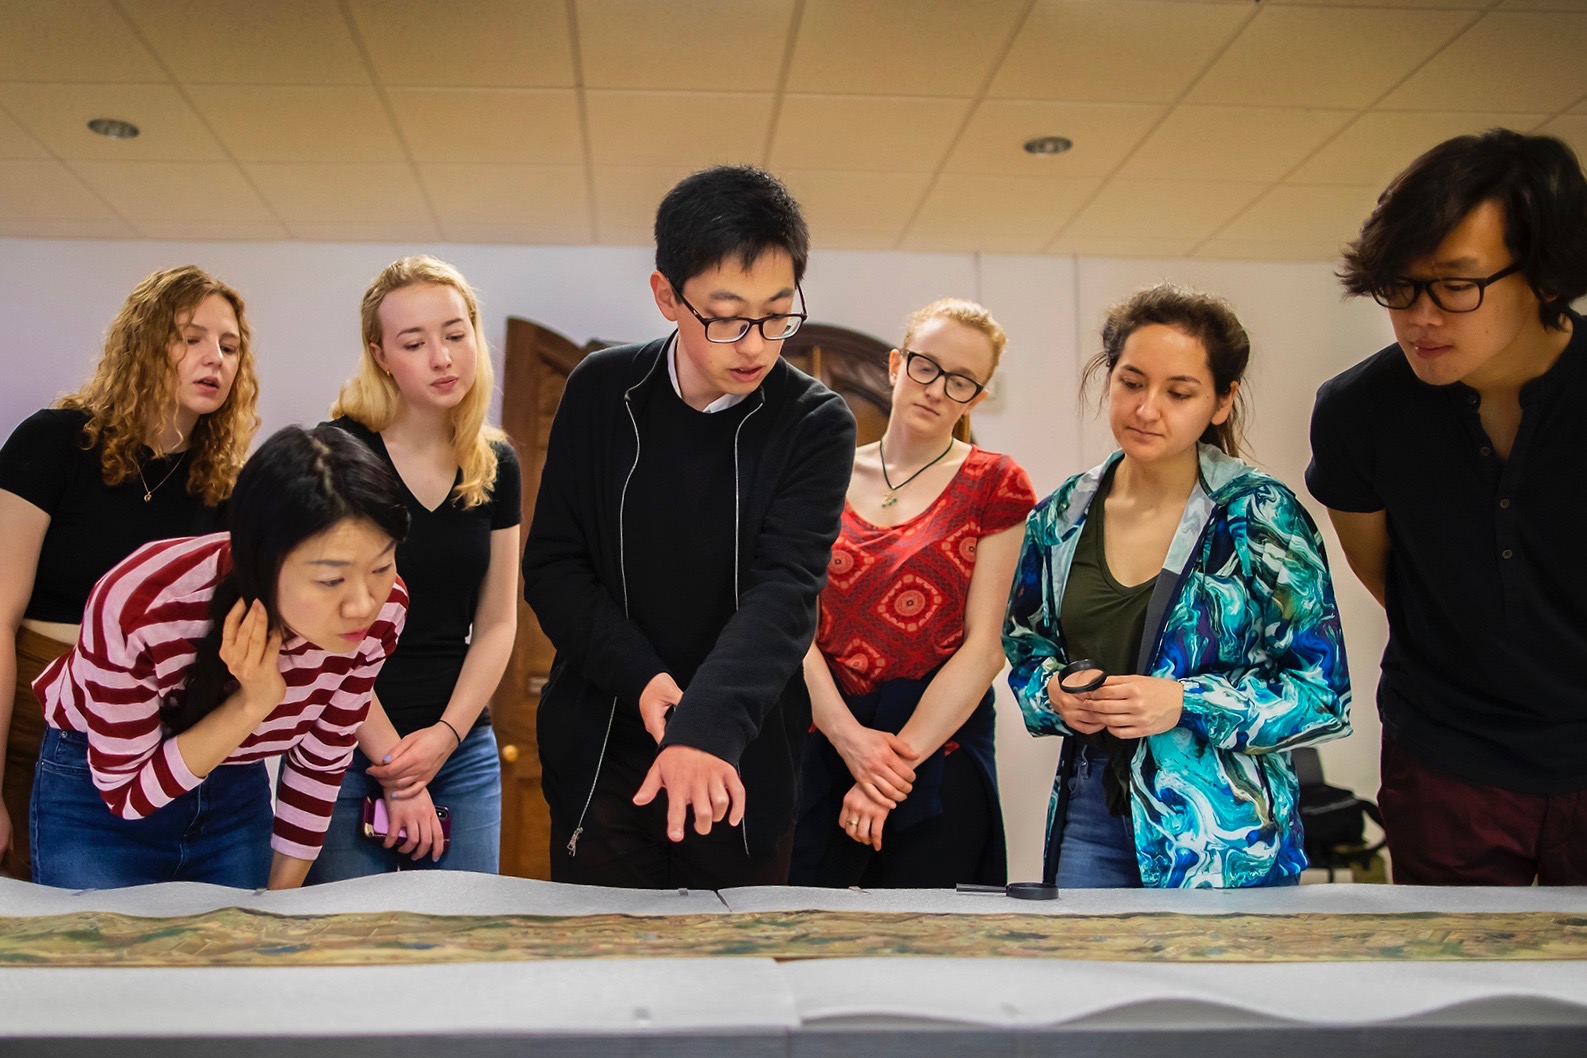 Seven students gathered together looking at a painted Chinese scroll unrolled on a table. 